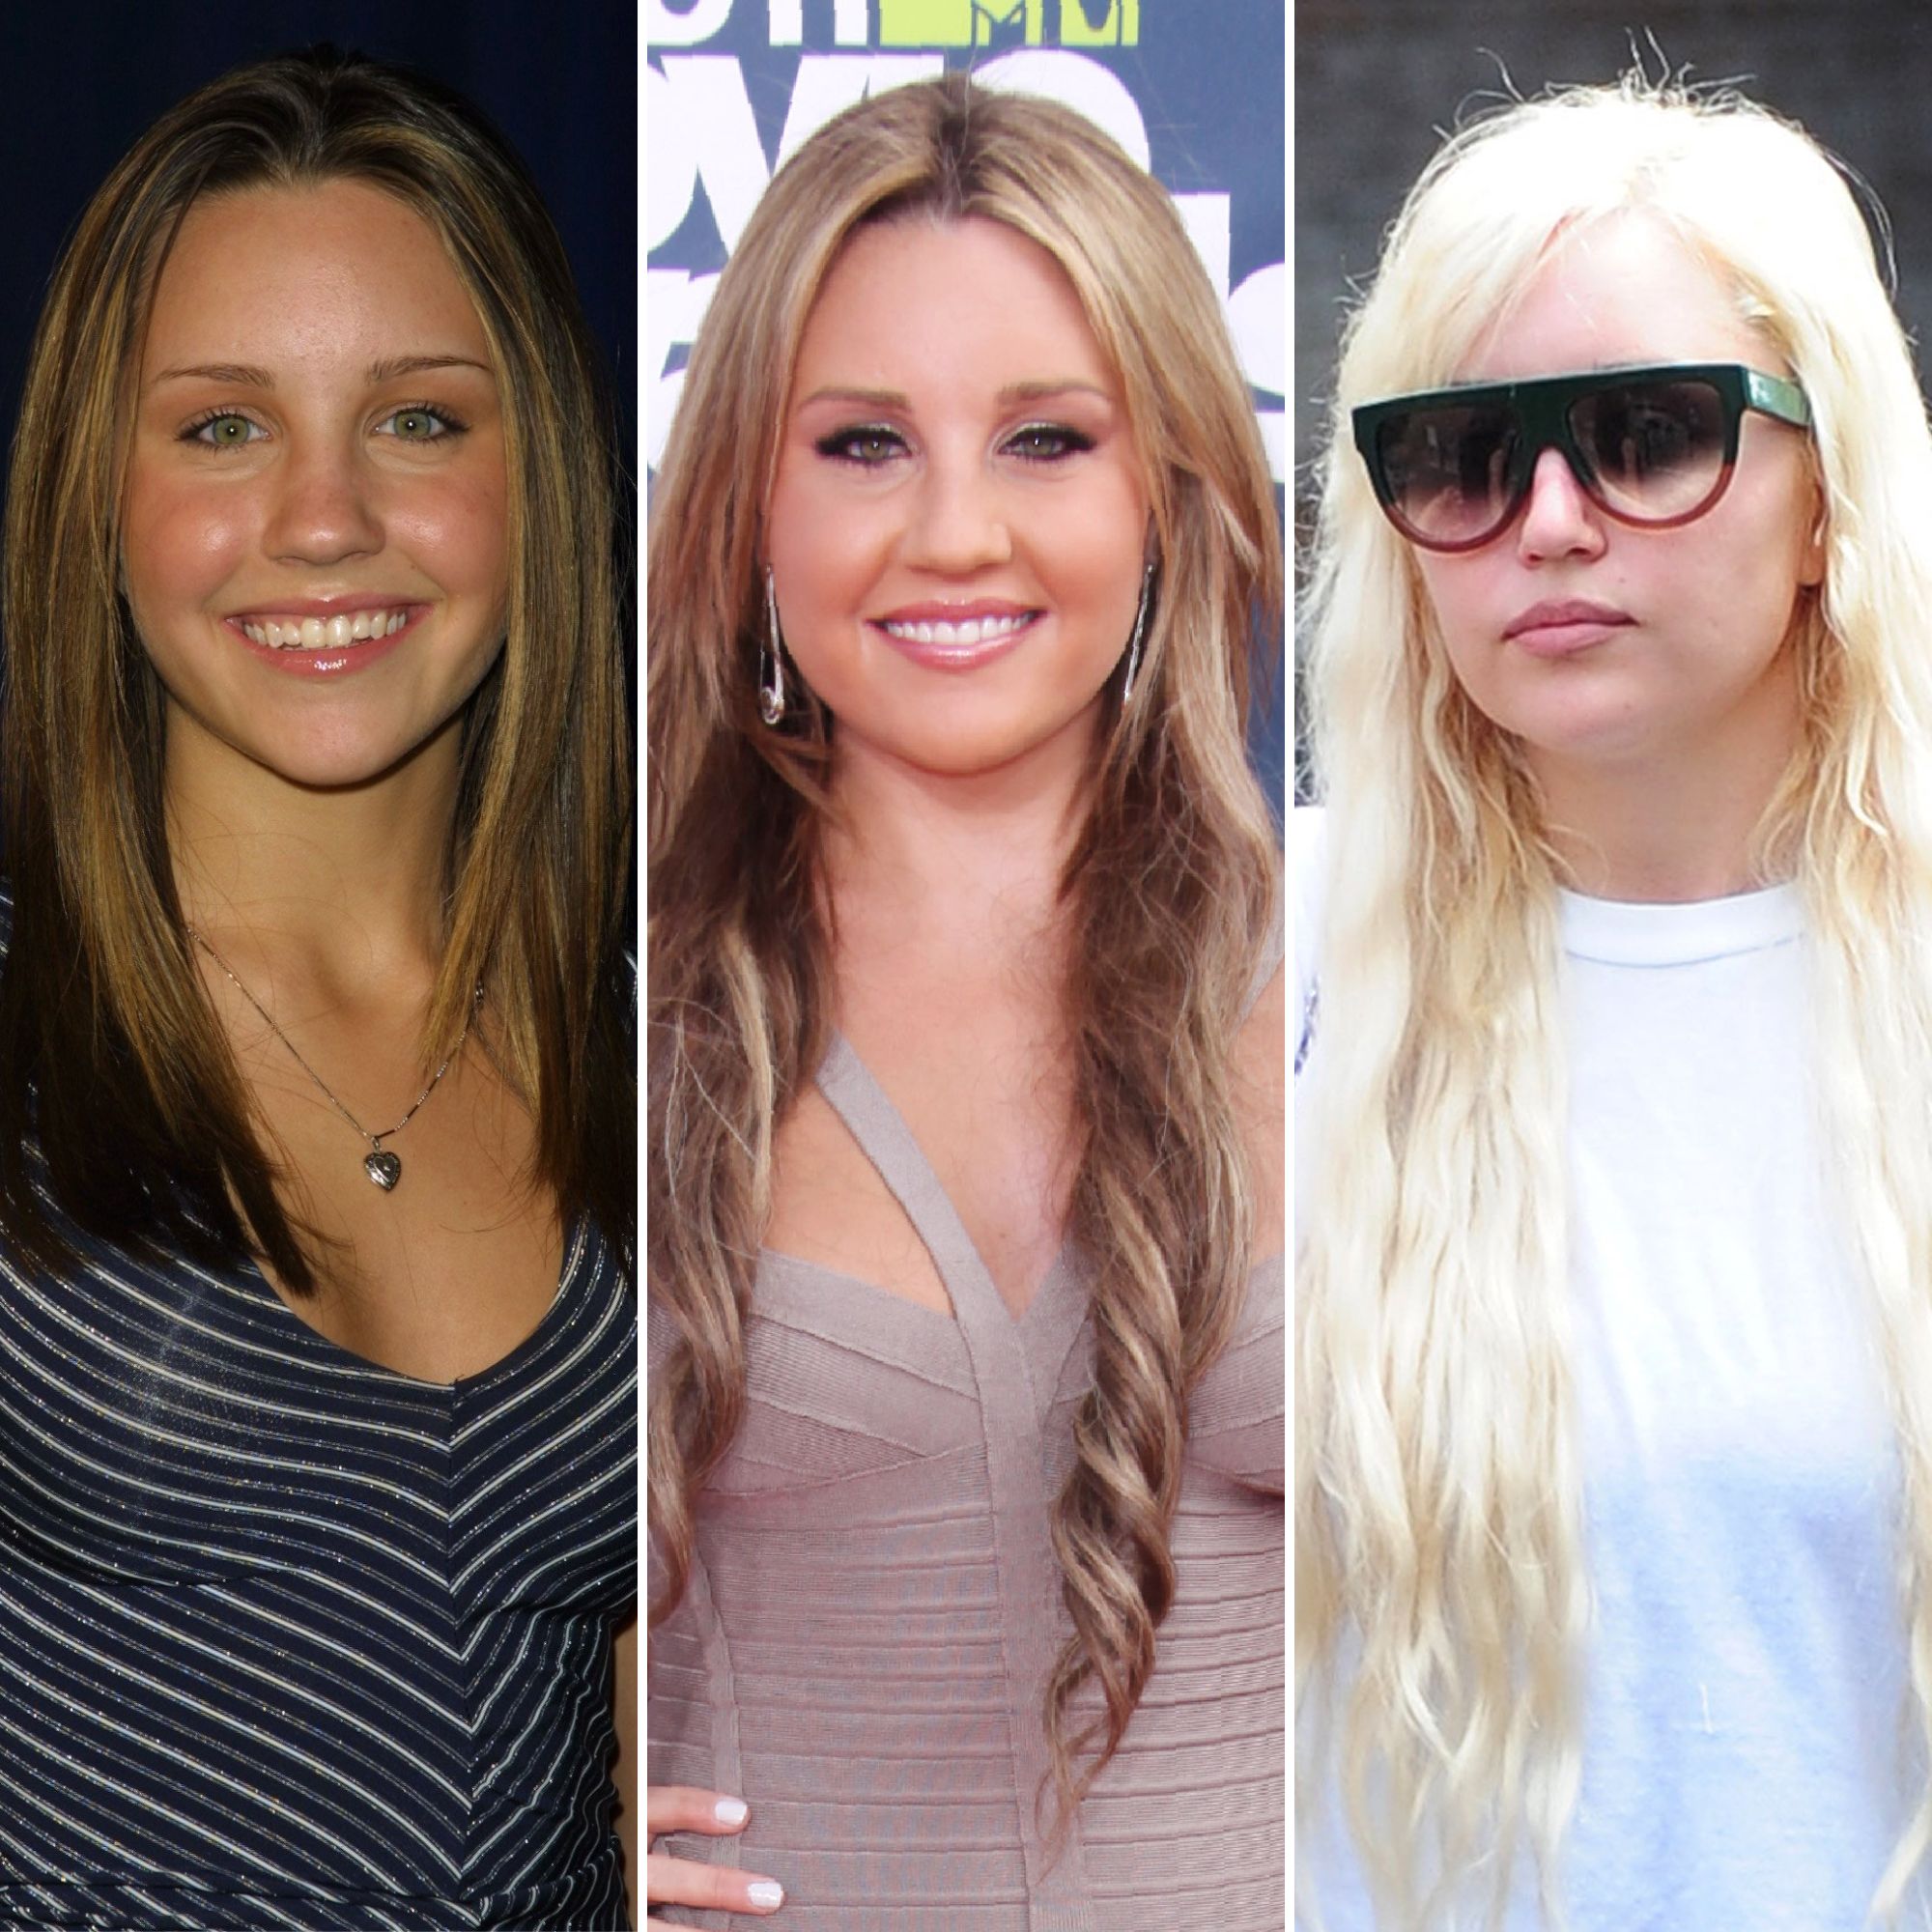 Amanda Bynes Transformation From Nickelodeon Star to Now